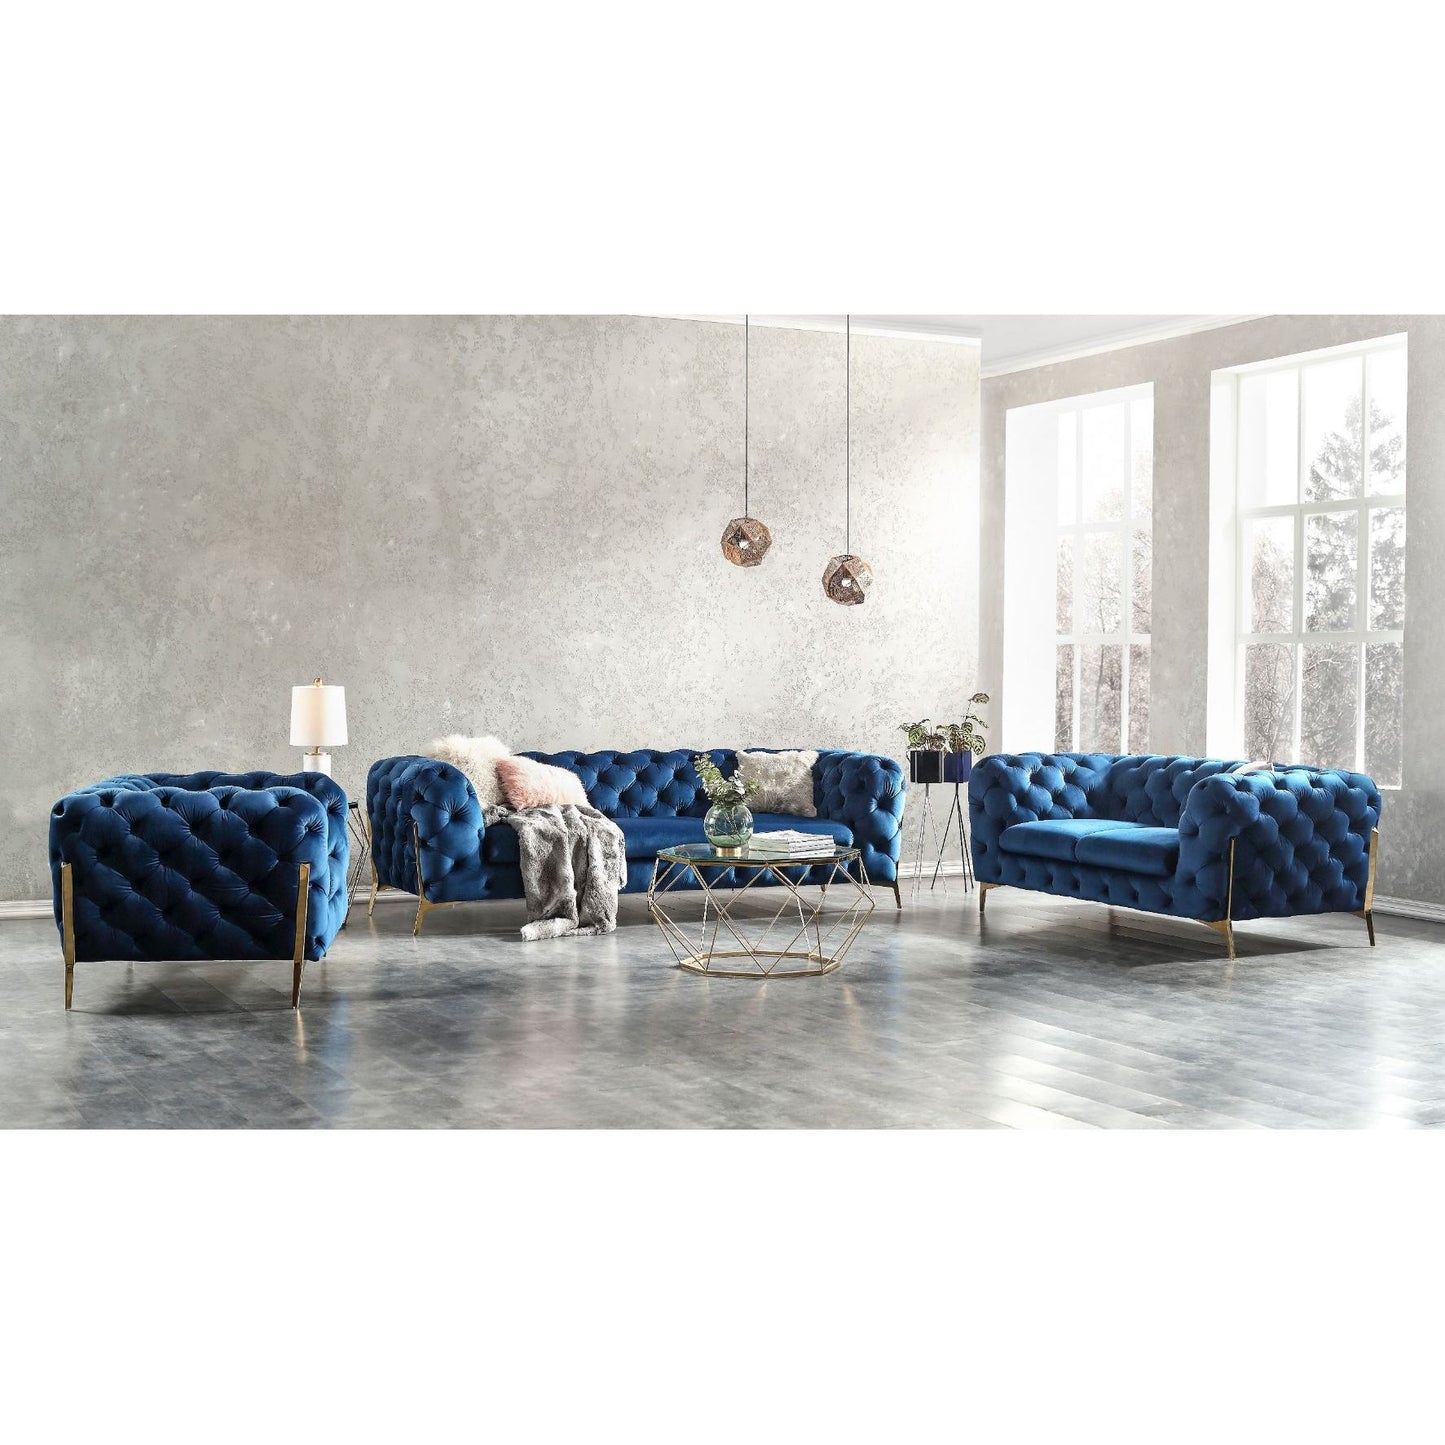 Glamour Chair in Blue jnmfurniture Chairs & Seating 17182-C